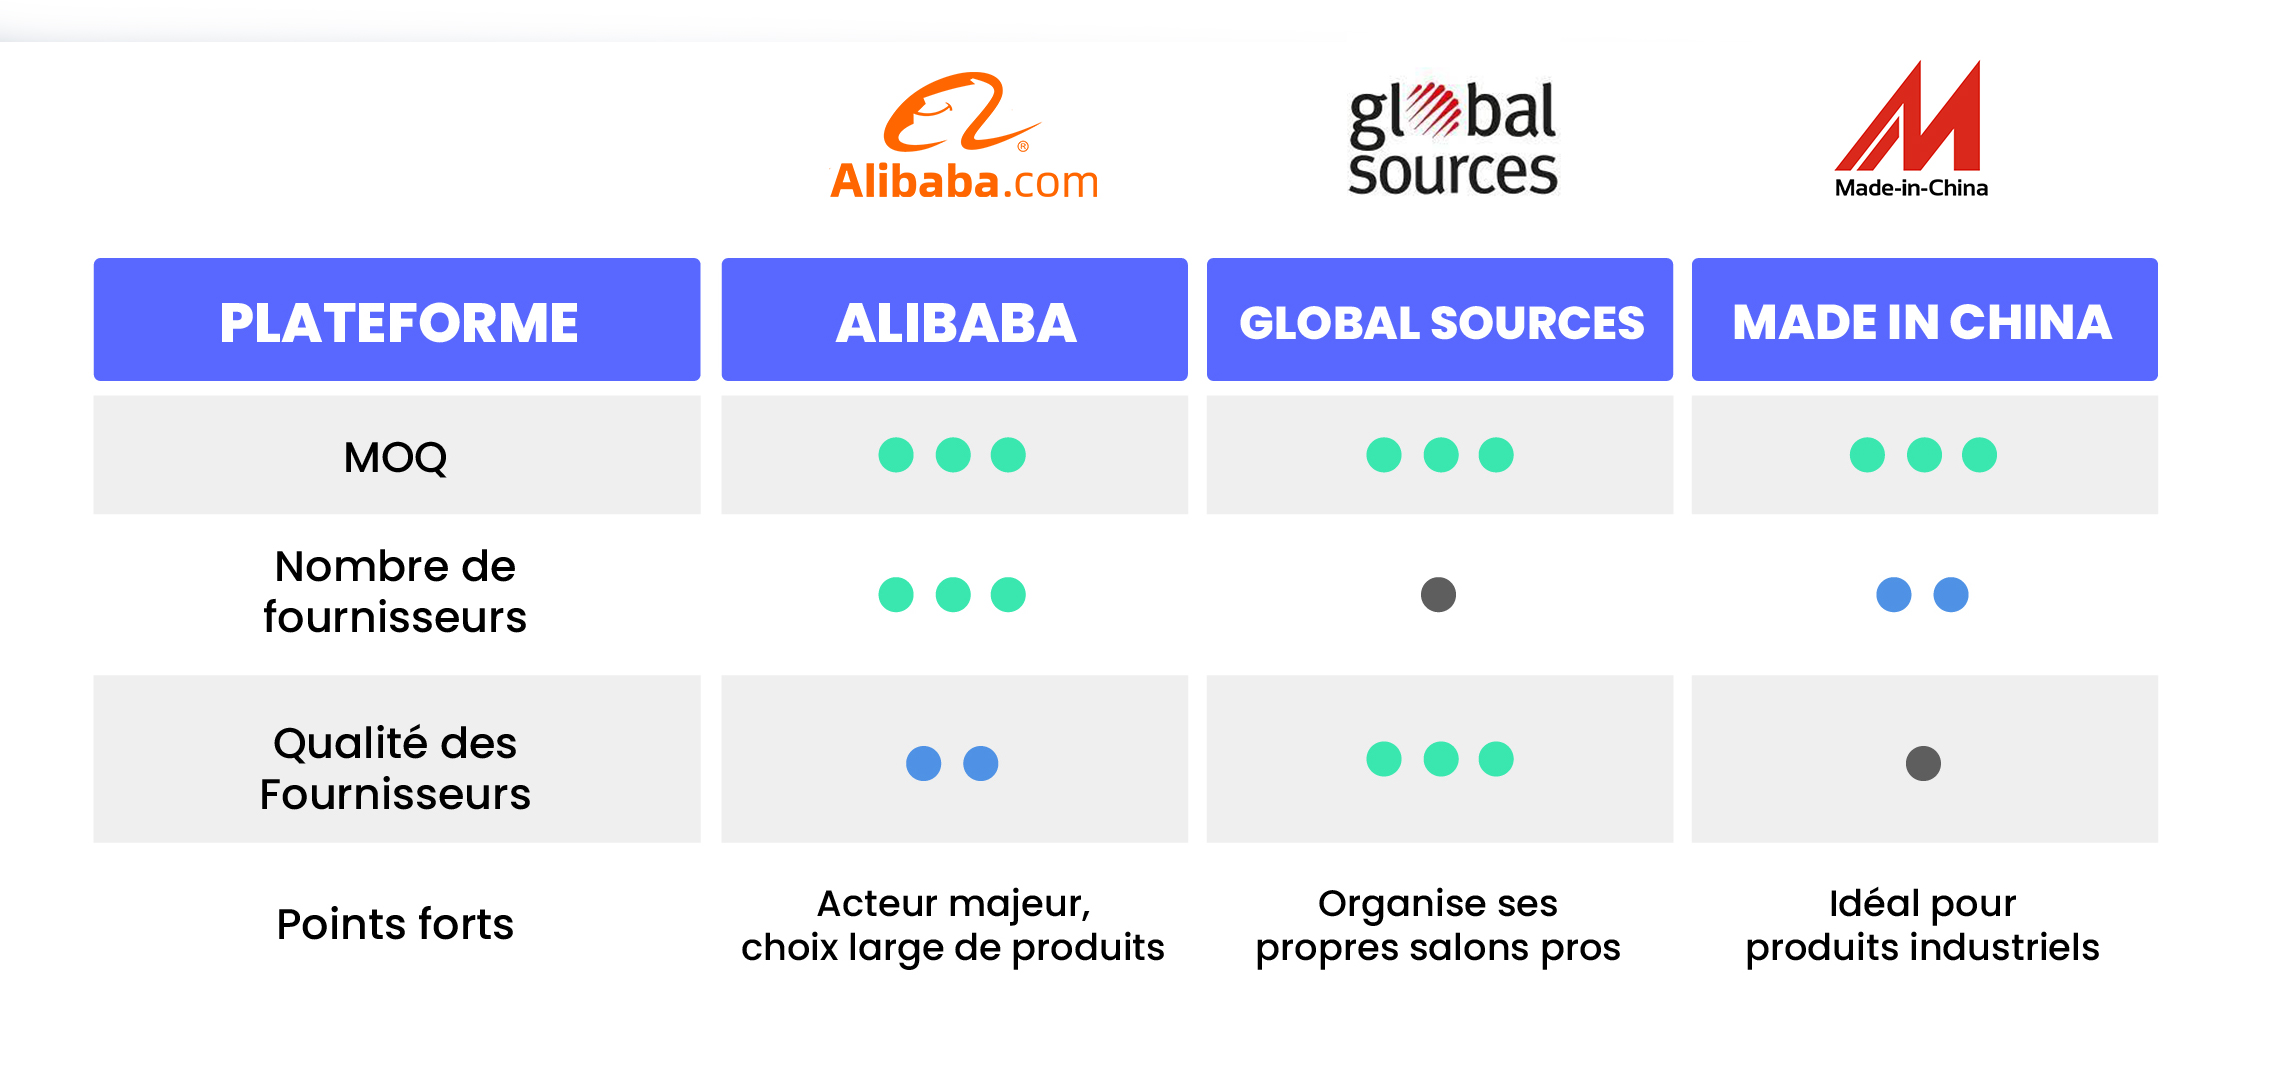 tableau comparatif alibaba vs globalsources vs madeinchina